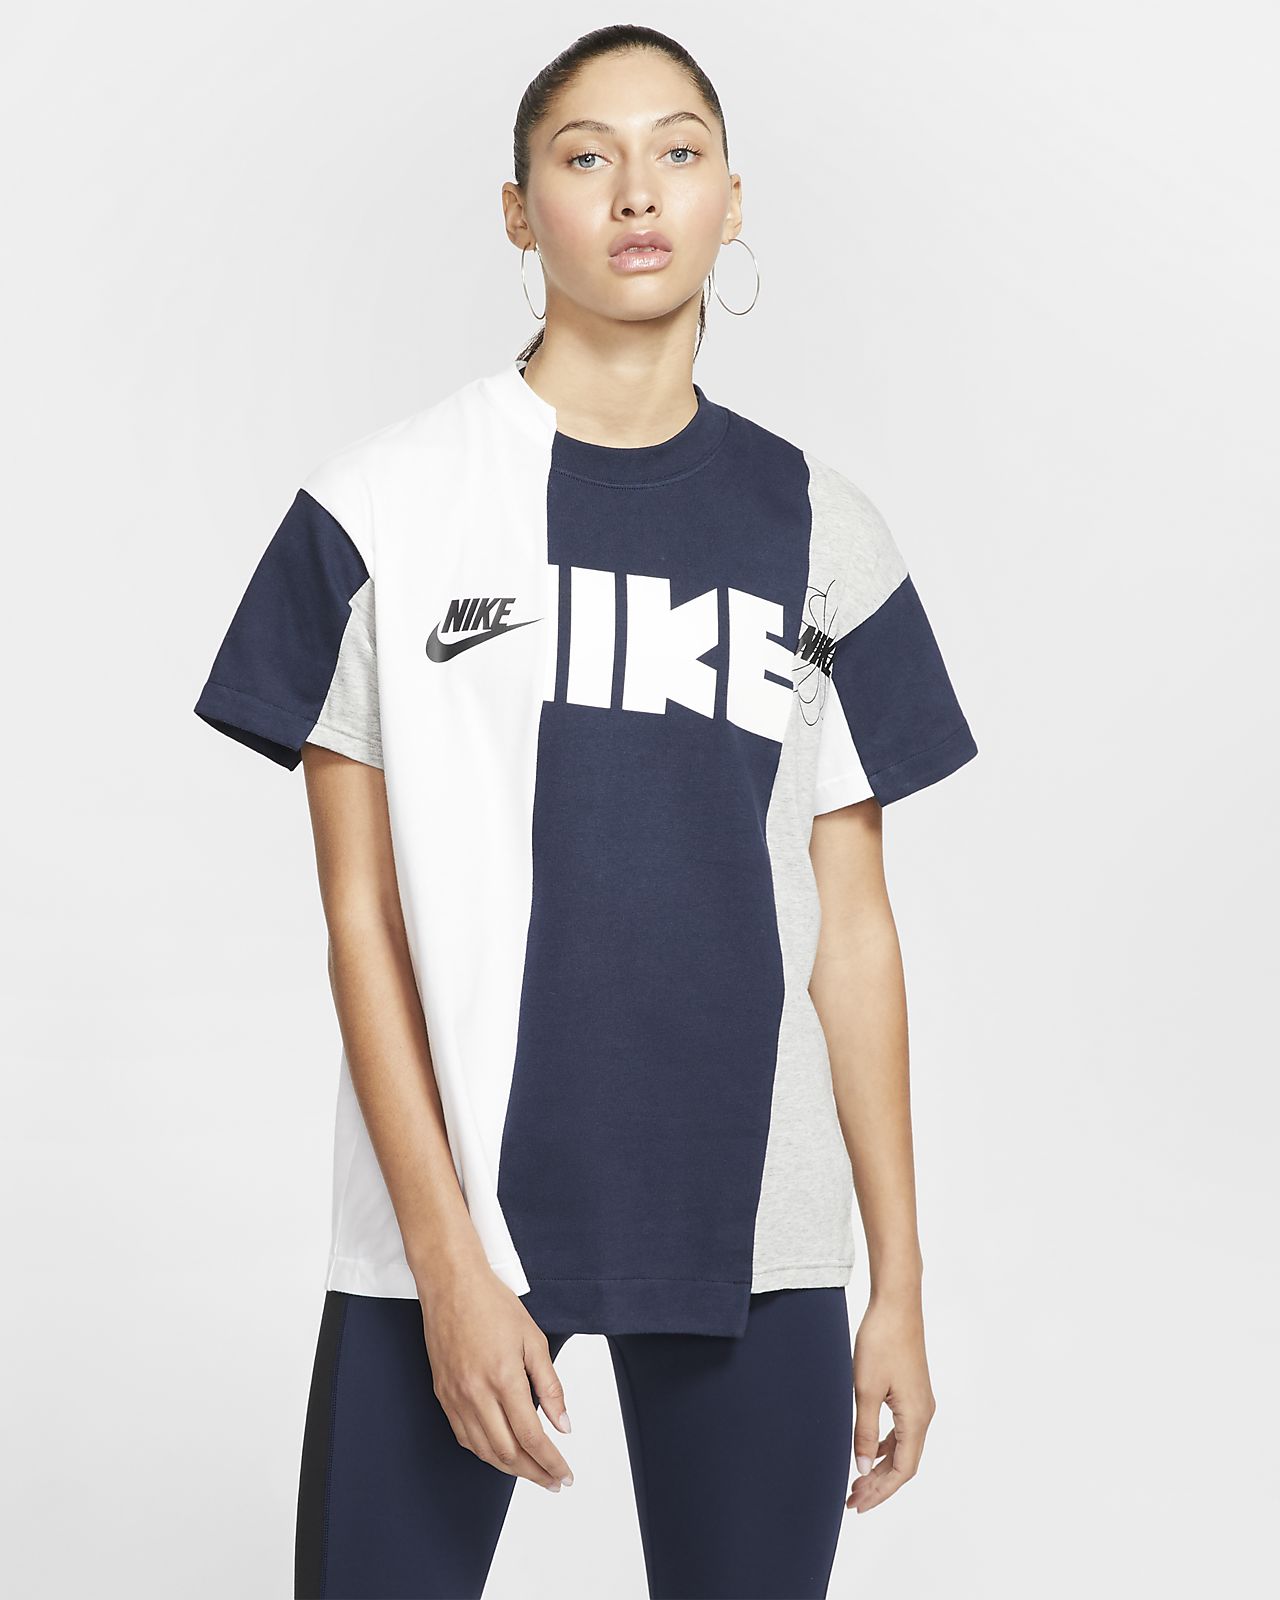 nike shirt with gold check